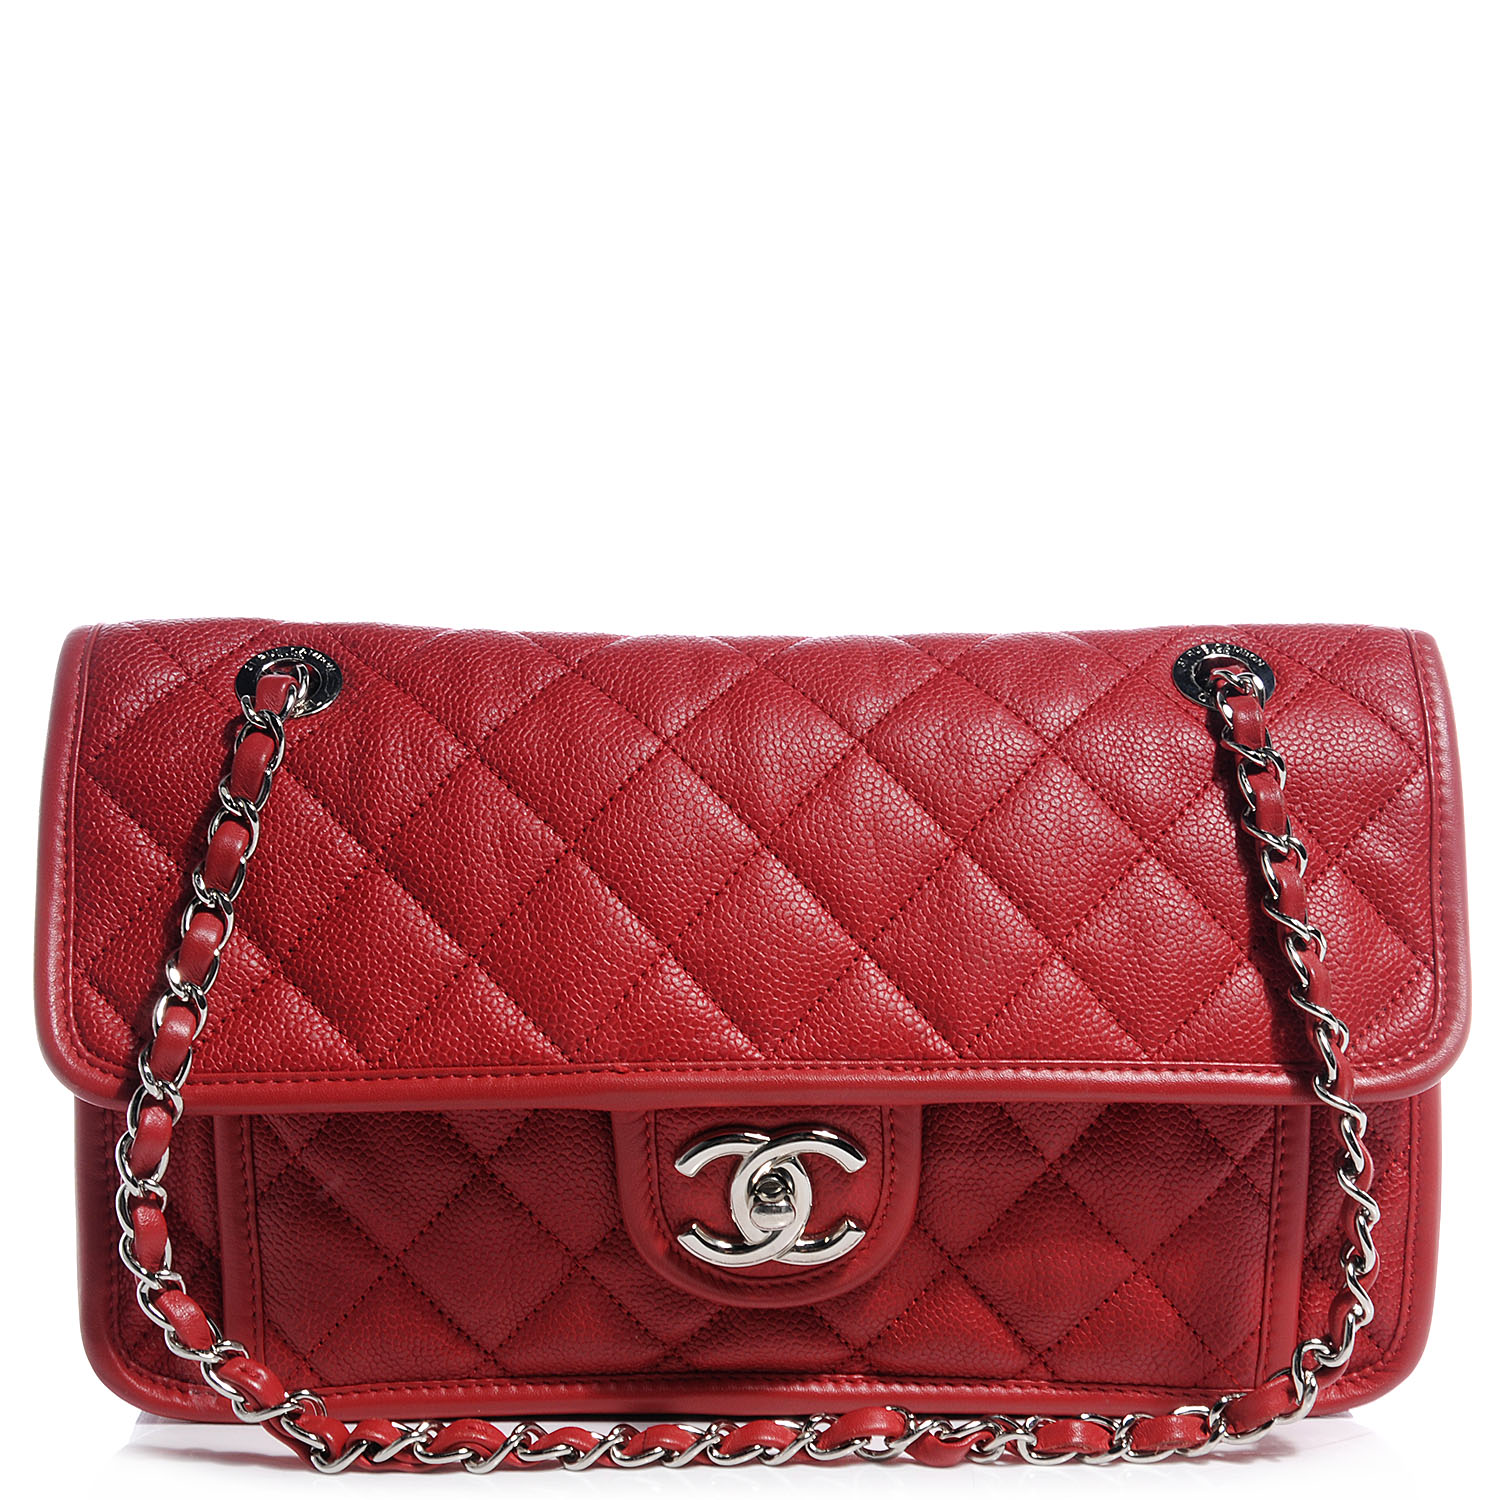 CHANEL Caviar French Riviera Flap Red 59822